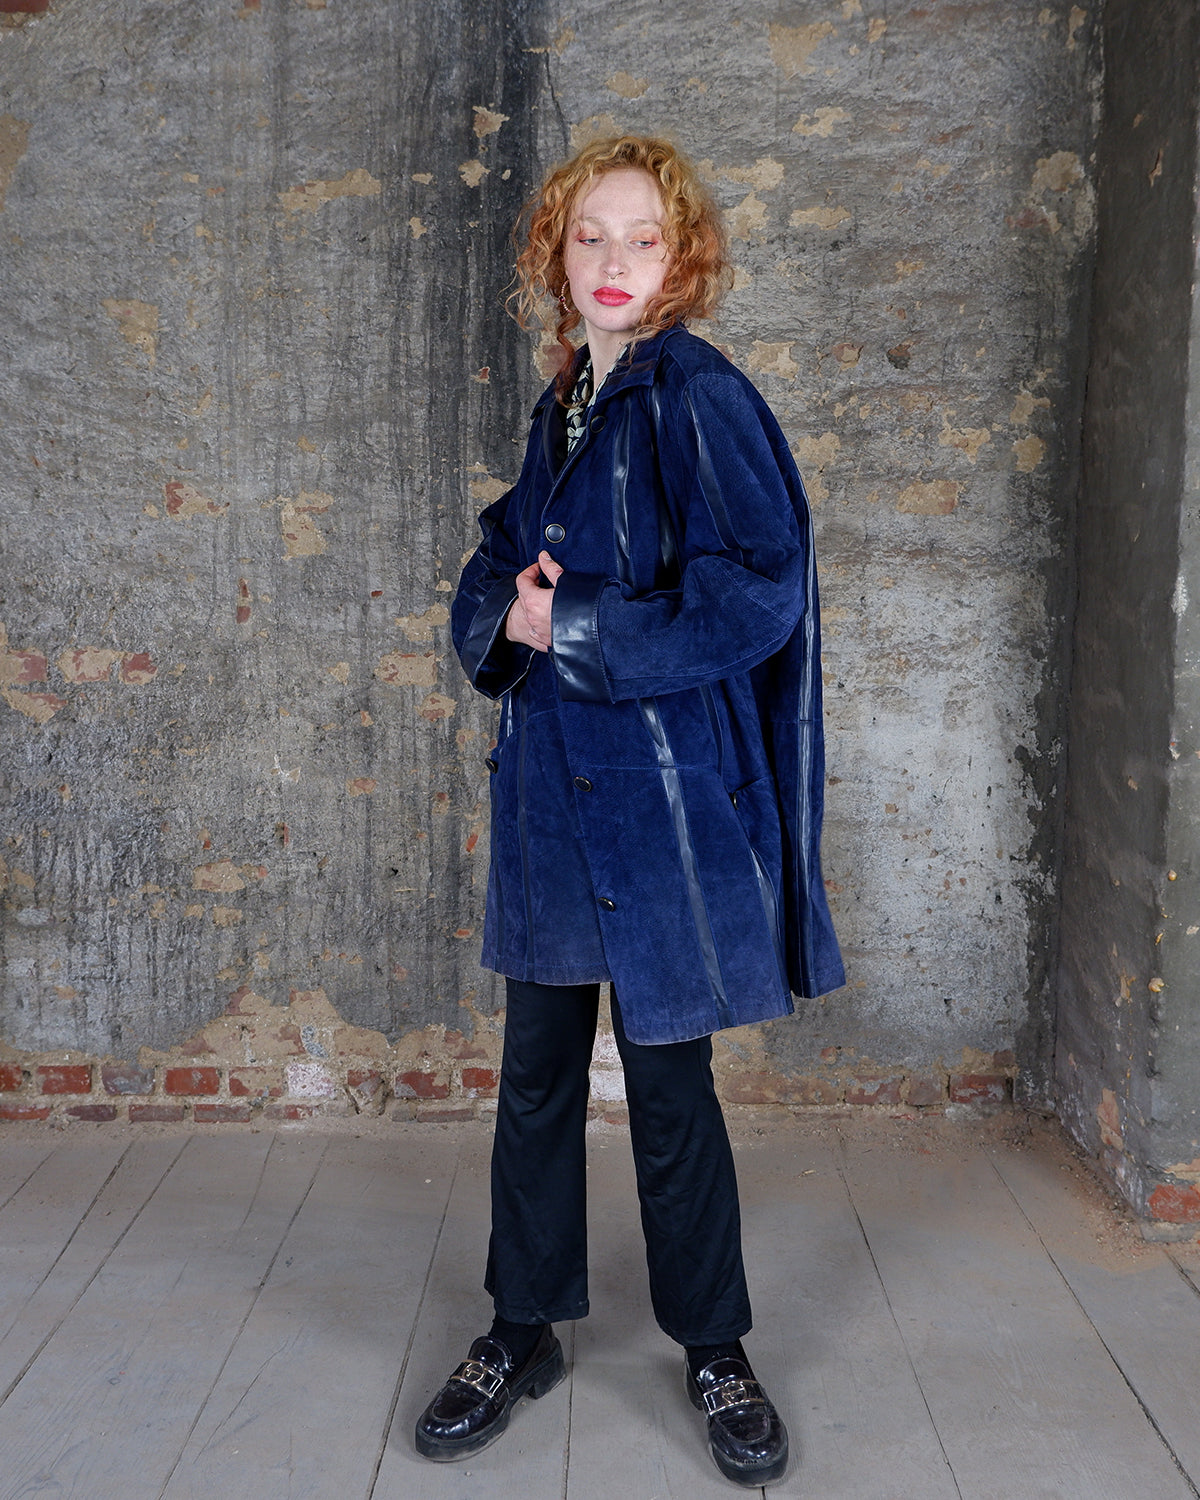 This vintage oversized navy blue leather coat (thin!) features shoulder pads and a relaxed fit, exuding effortless style. The eye-catching navy blue color is complemented by faux leather stripes, adding a touch of edge. Ideal for sizes L and XL, this coat is a true representation of vintage fashion.